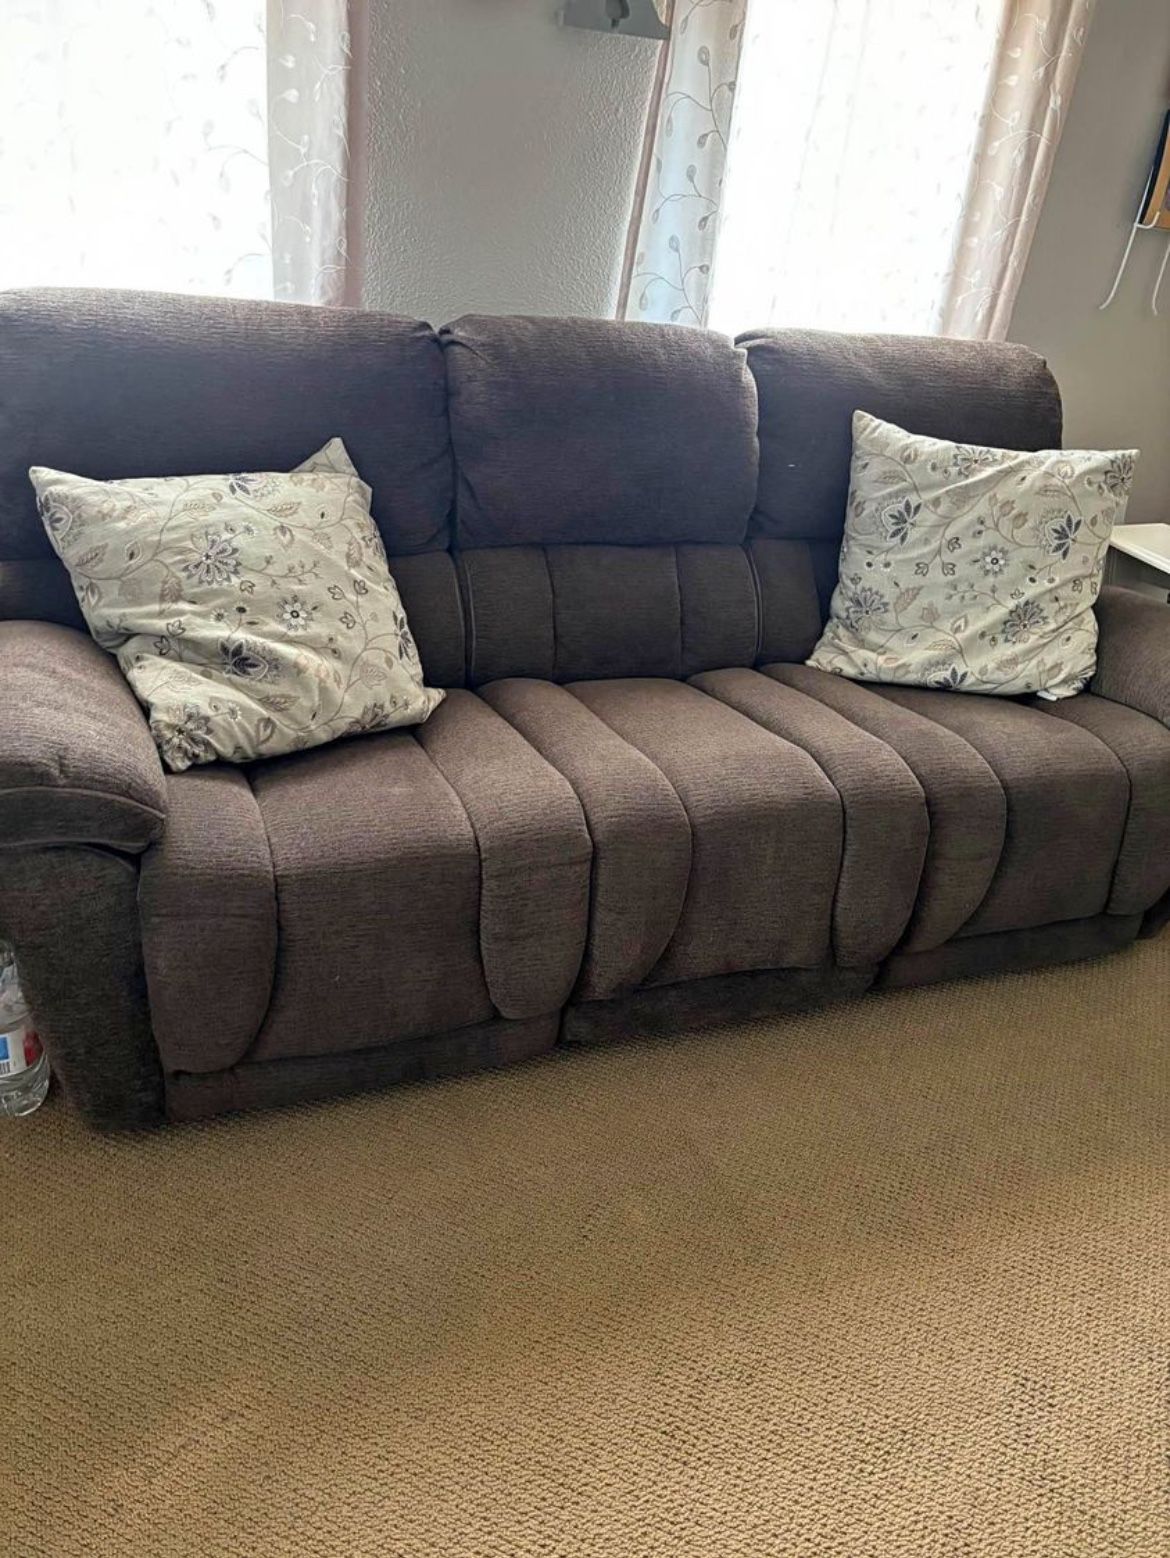 Brown couch recliner 